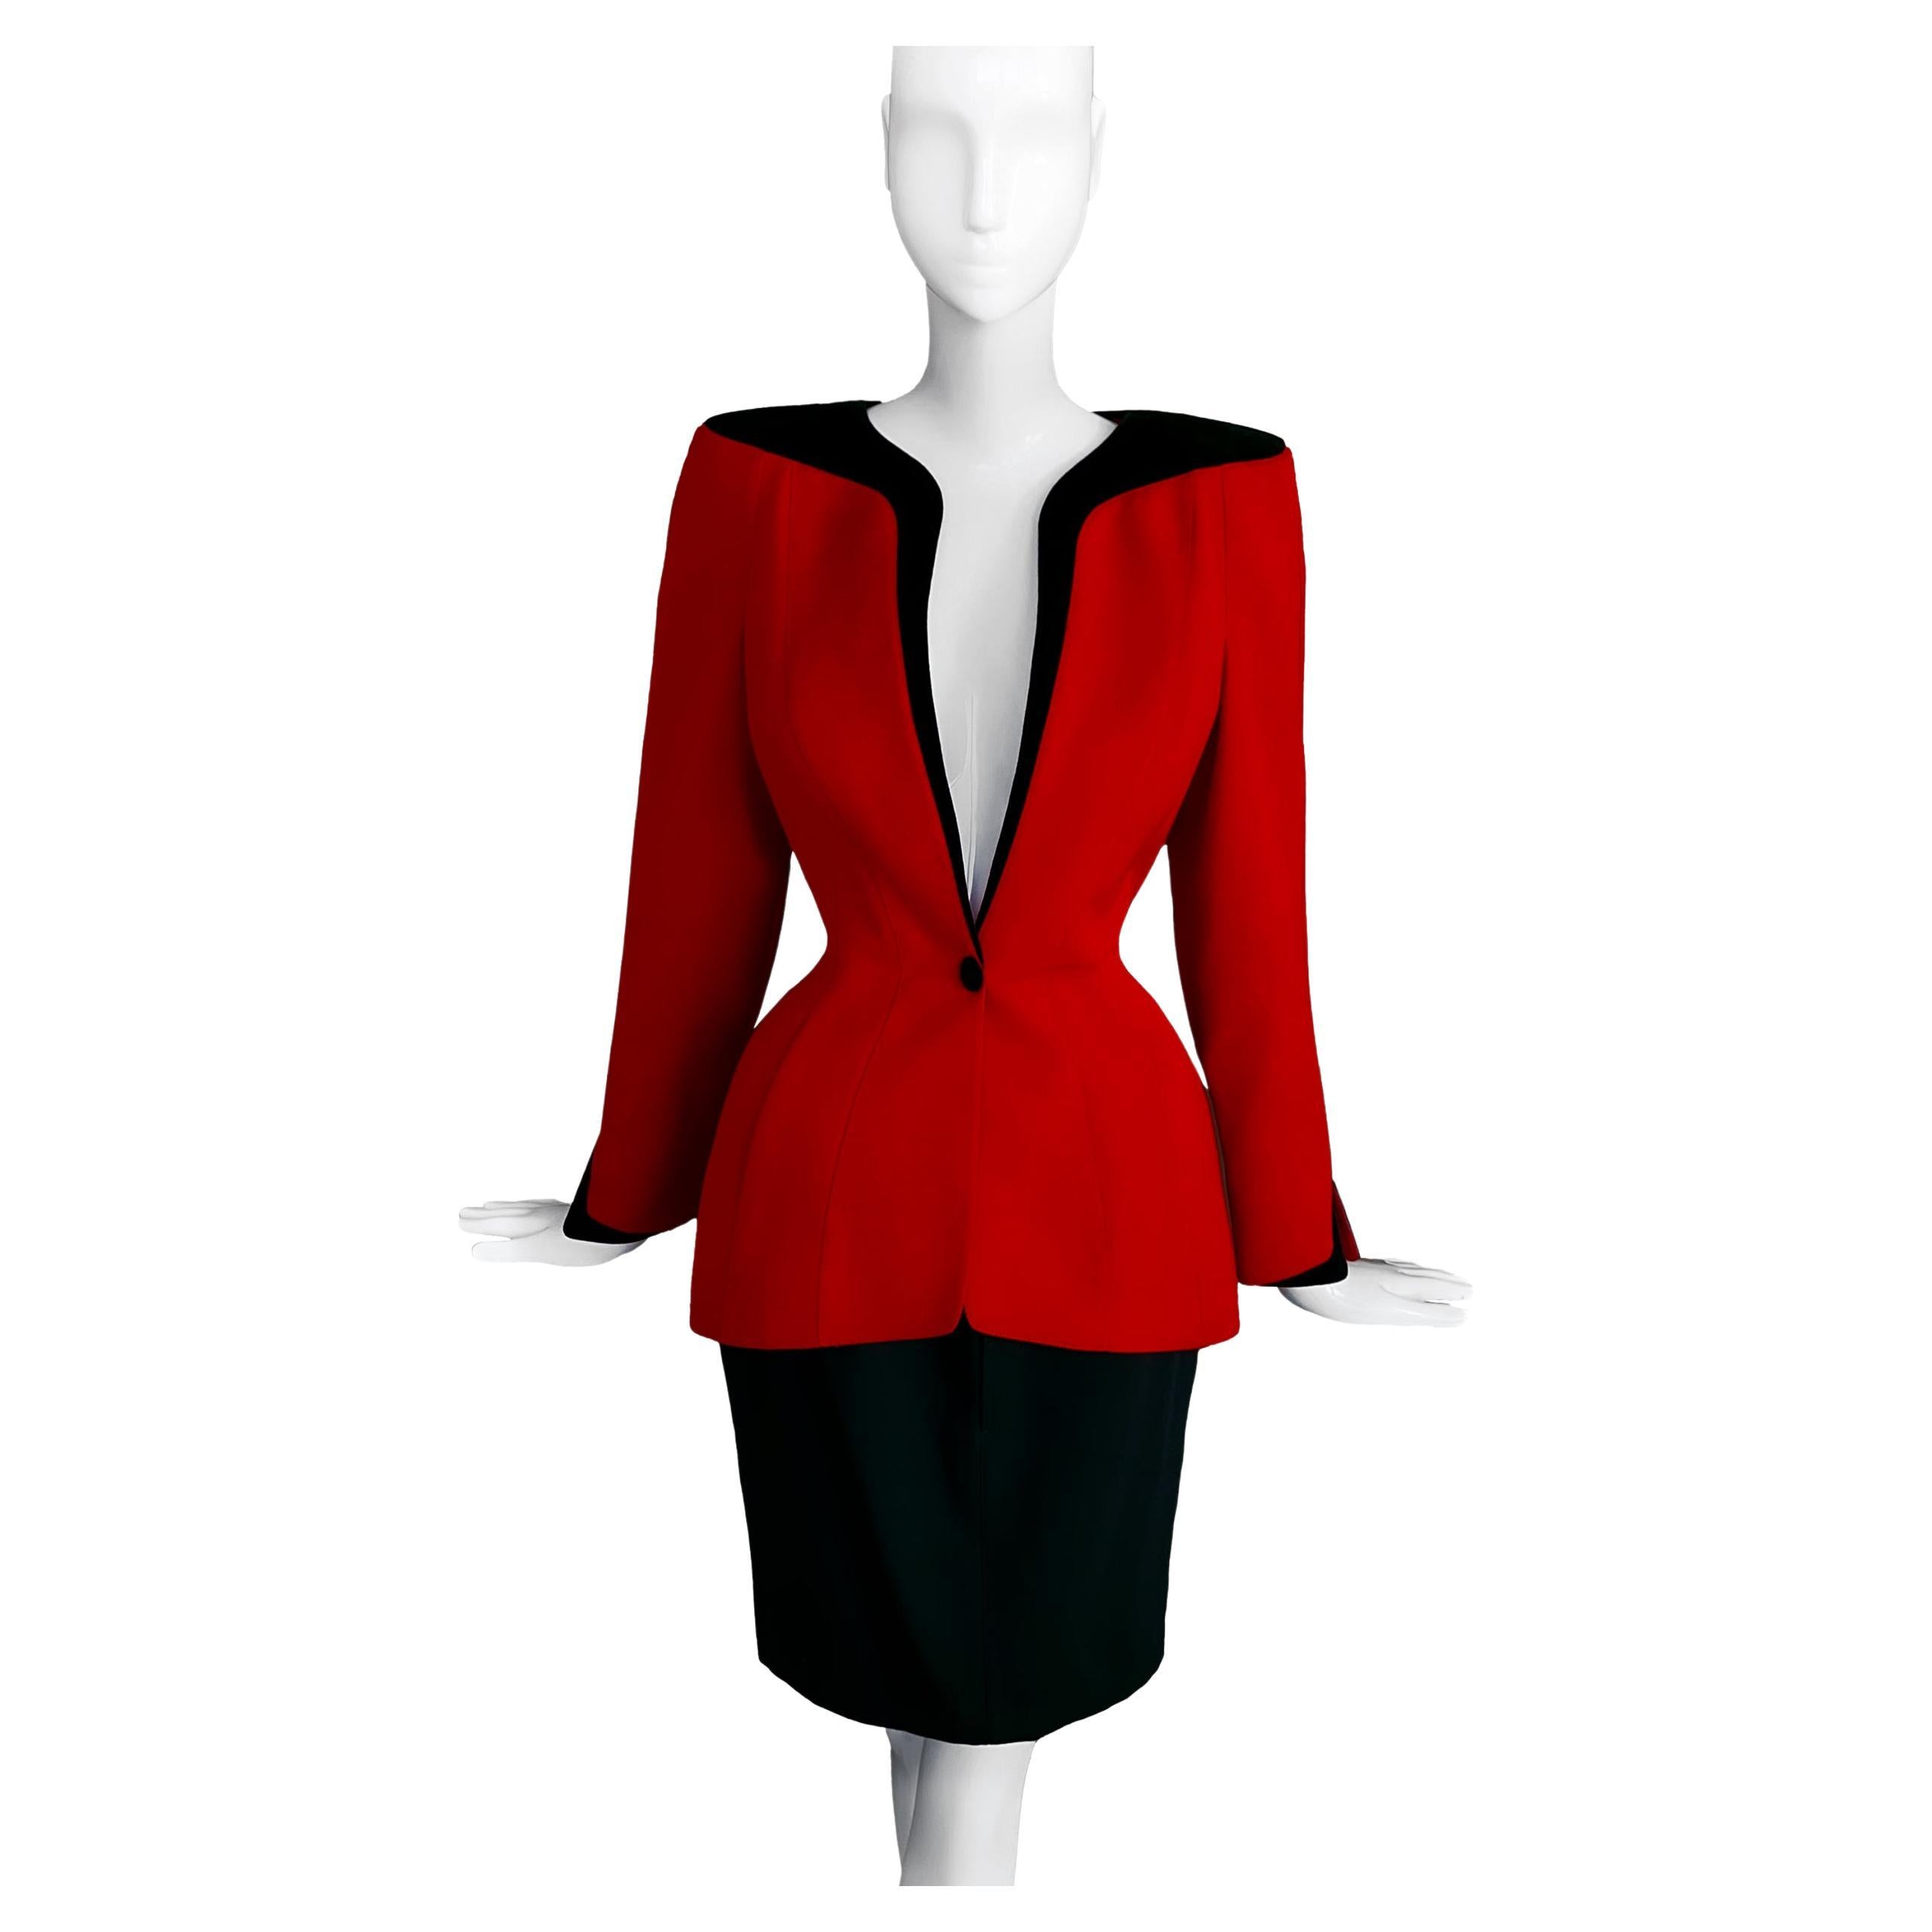 Thierry Mugler FW 1998/99 Suit Dramatic Deep V-Neck Jacket and Skirt Red Black  For Sale